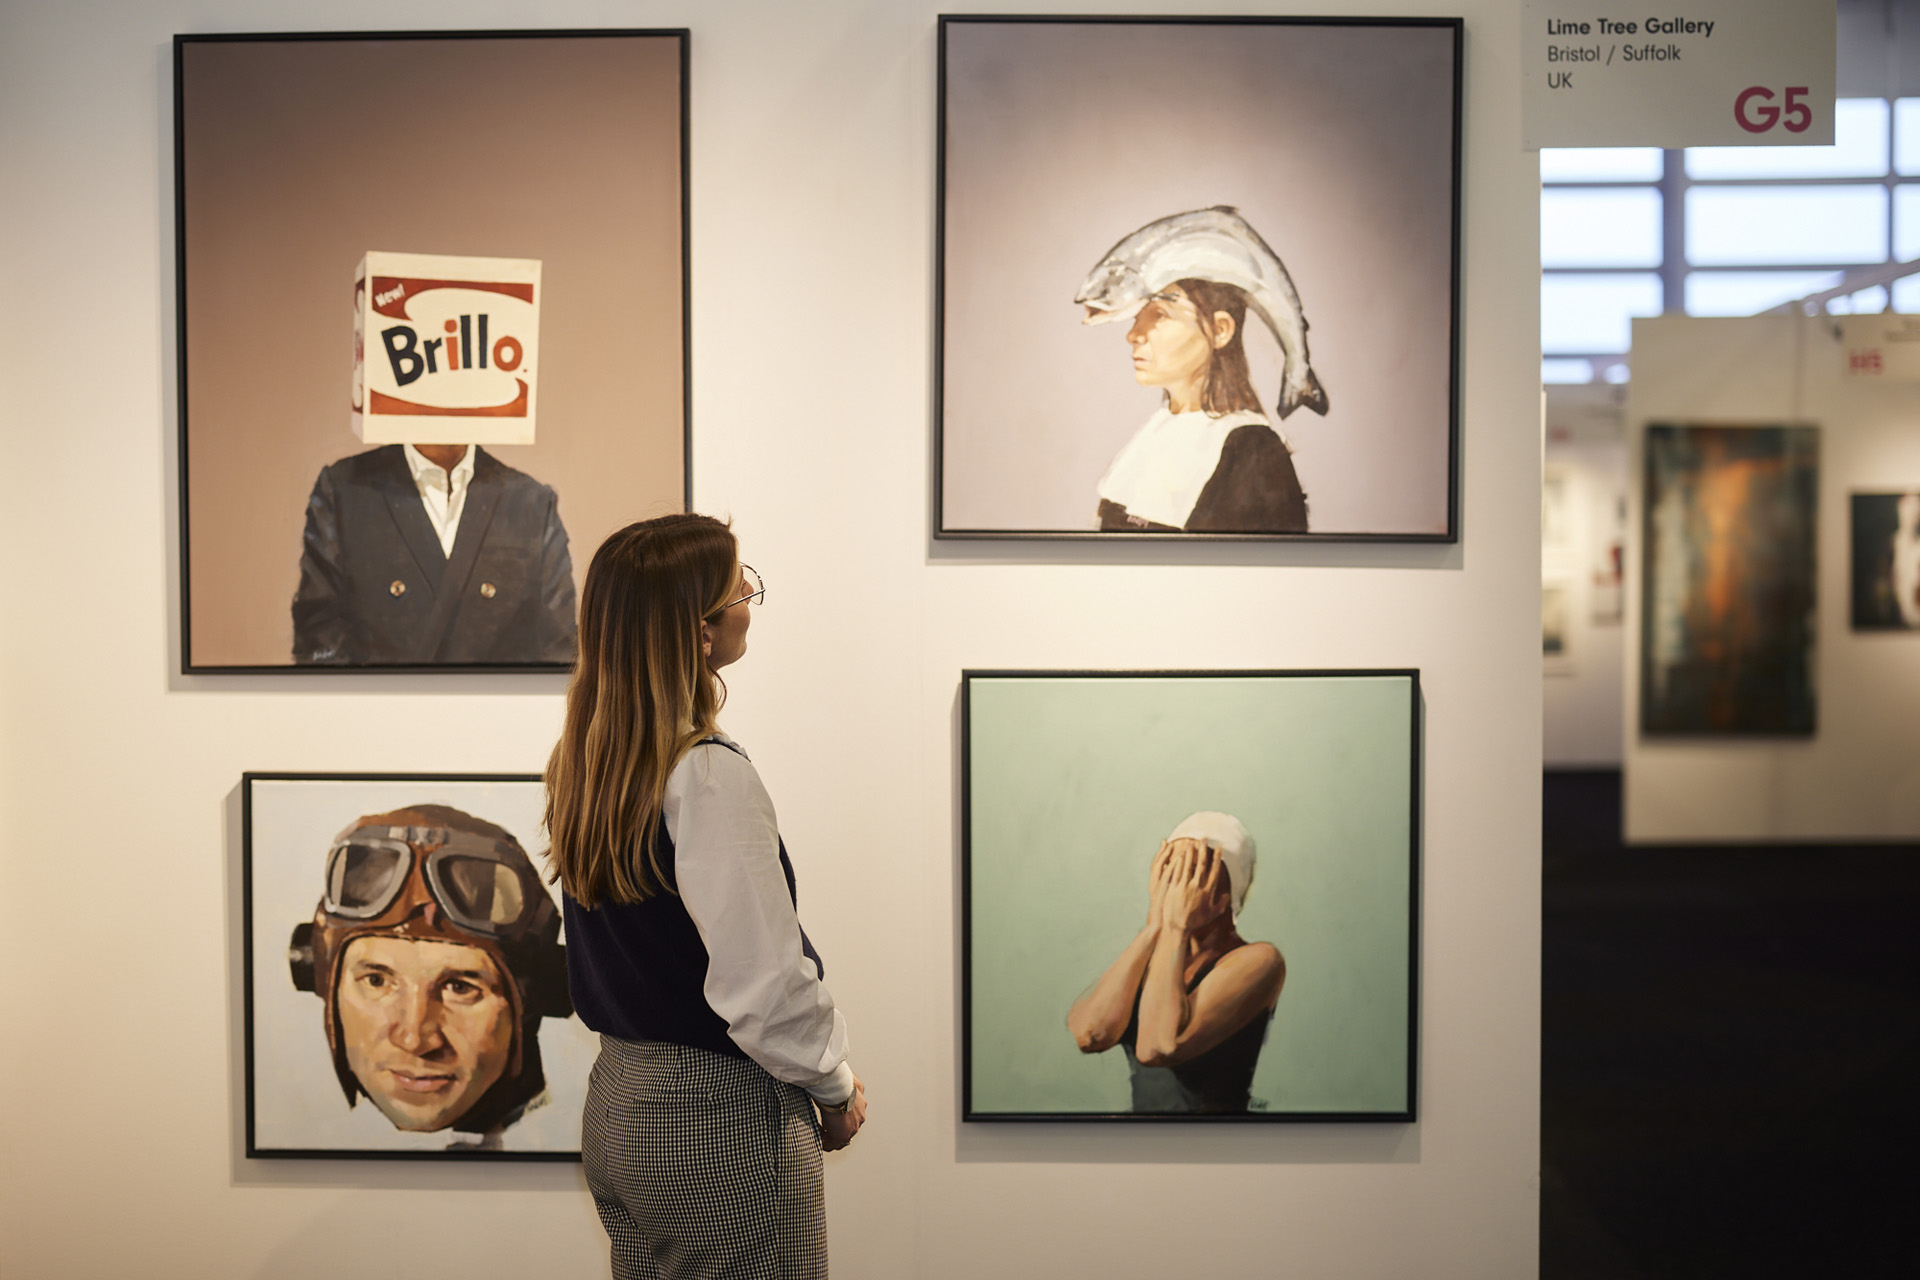 Affordable Art Fair Battersea Spring 2023. Featuring 1,000s of stunning contemporary artworks from over 100 lading Uk and international galleries.